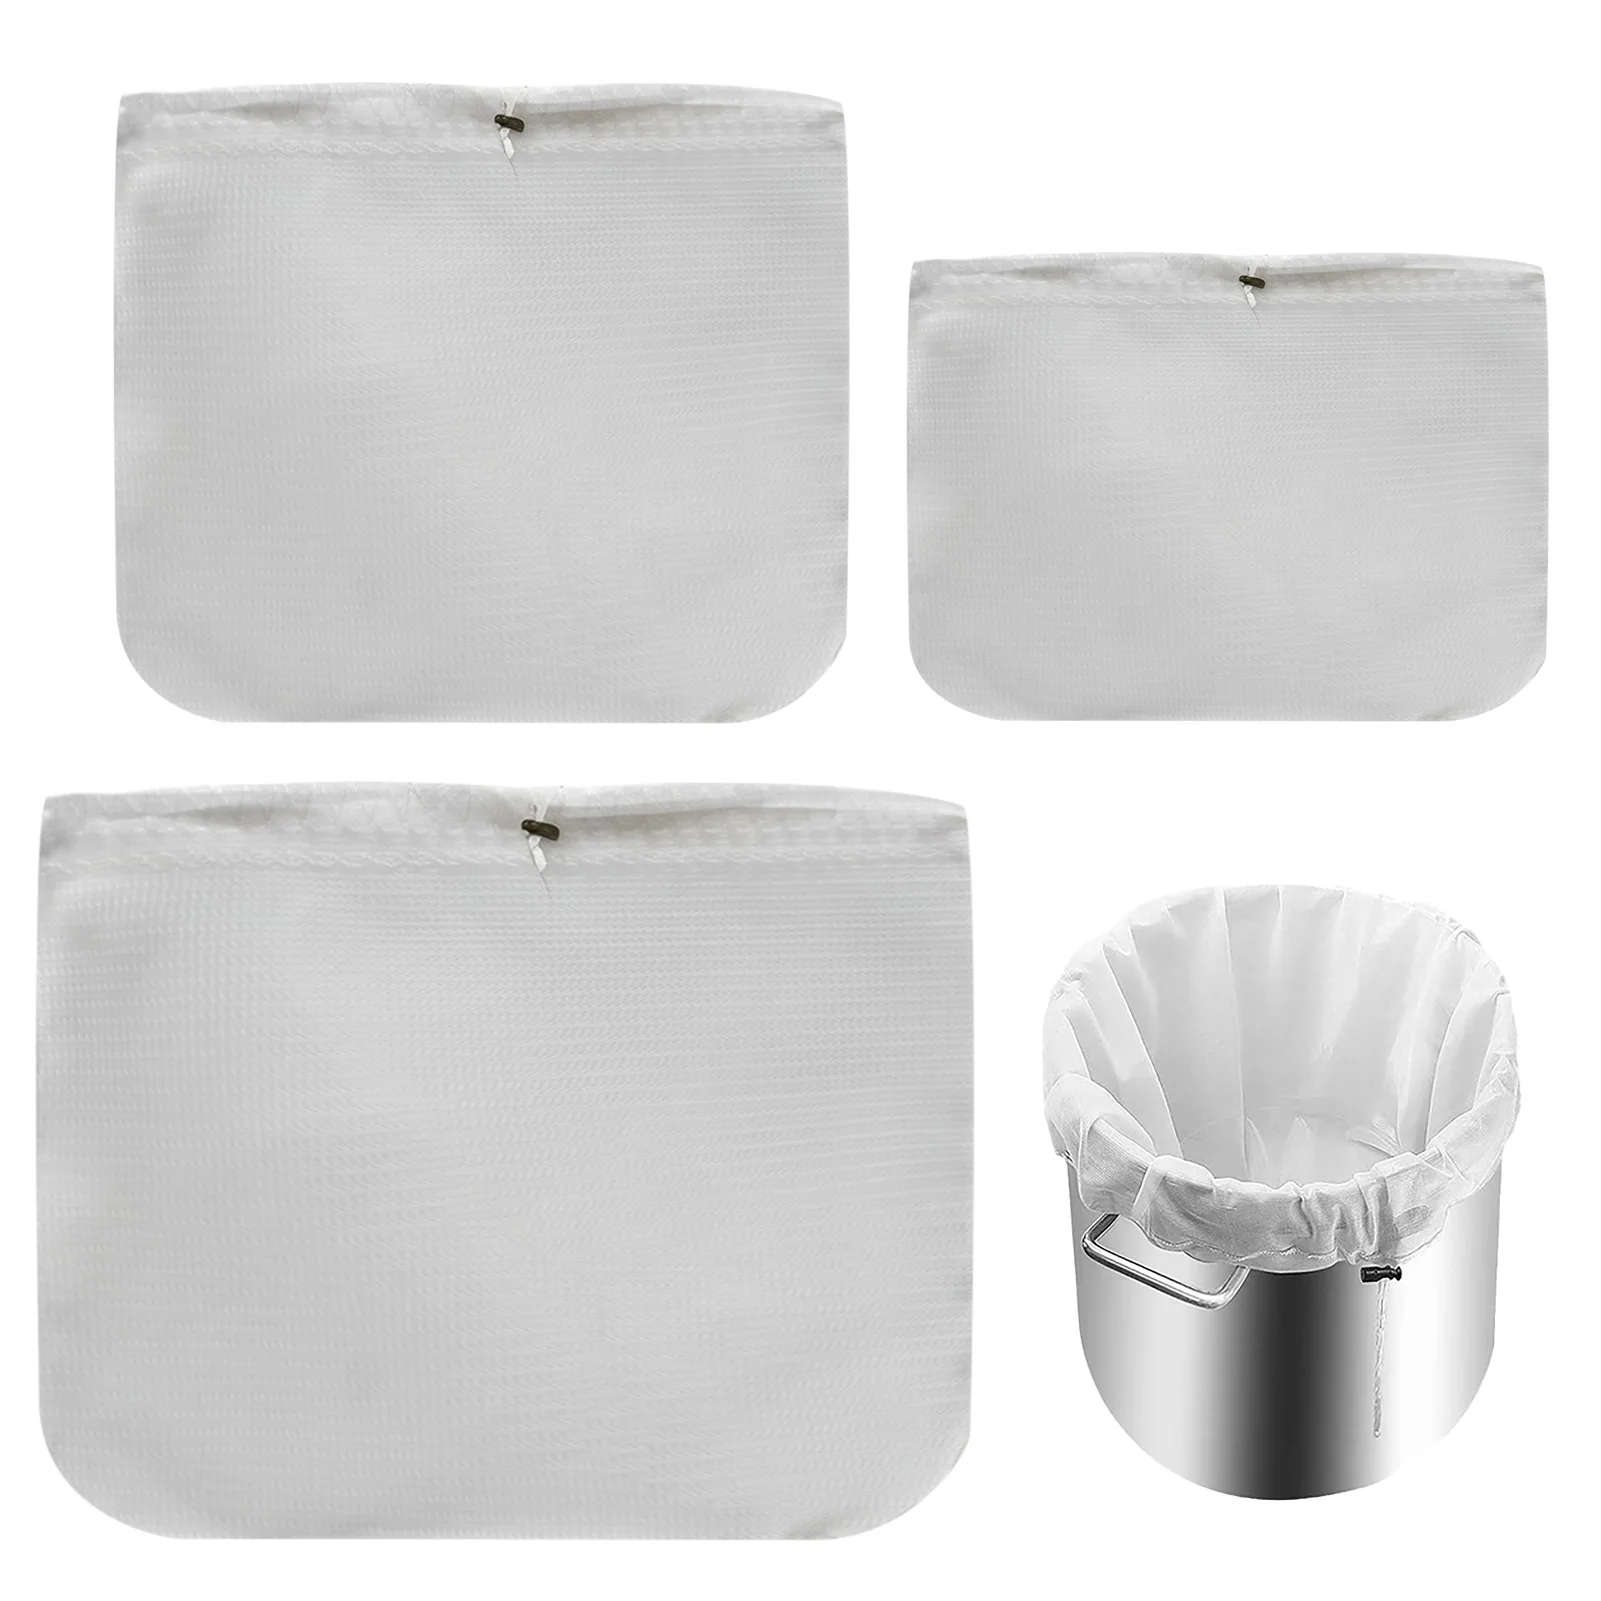 

3pcs Fine Mesh Strainer Bag Wine Making For Home Brewing Practical Nut Milk All Grain Wide Mouth Cheese Yogurt Reusable Beer